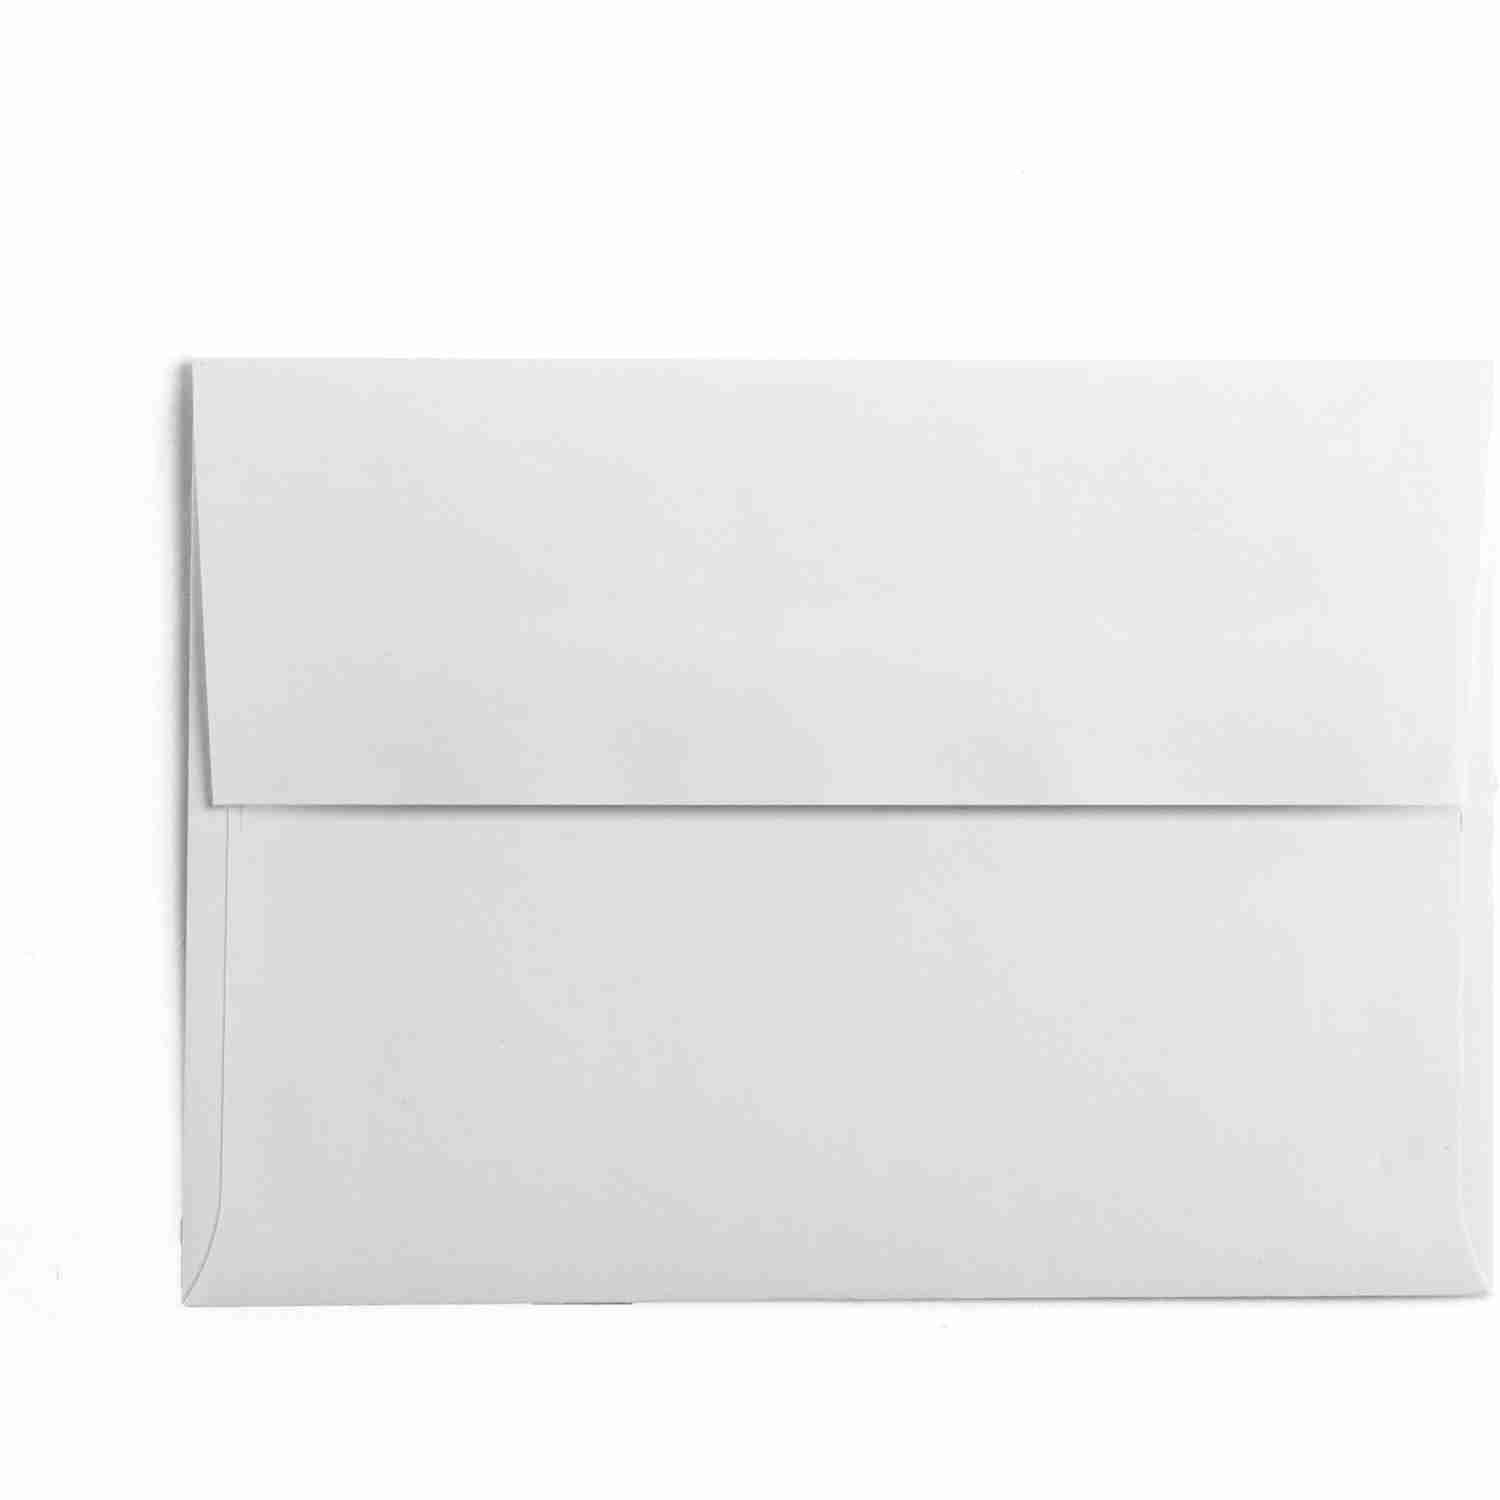 5x7-envelopes with discount code